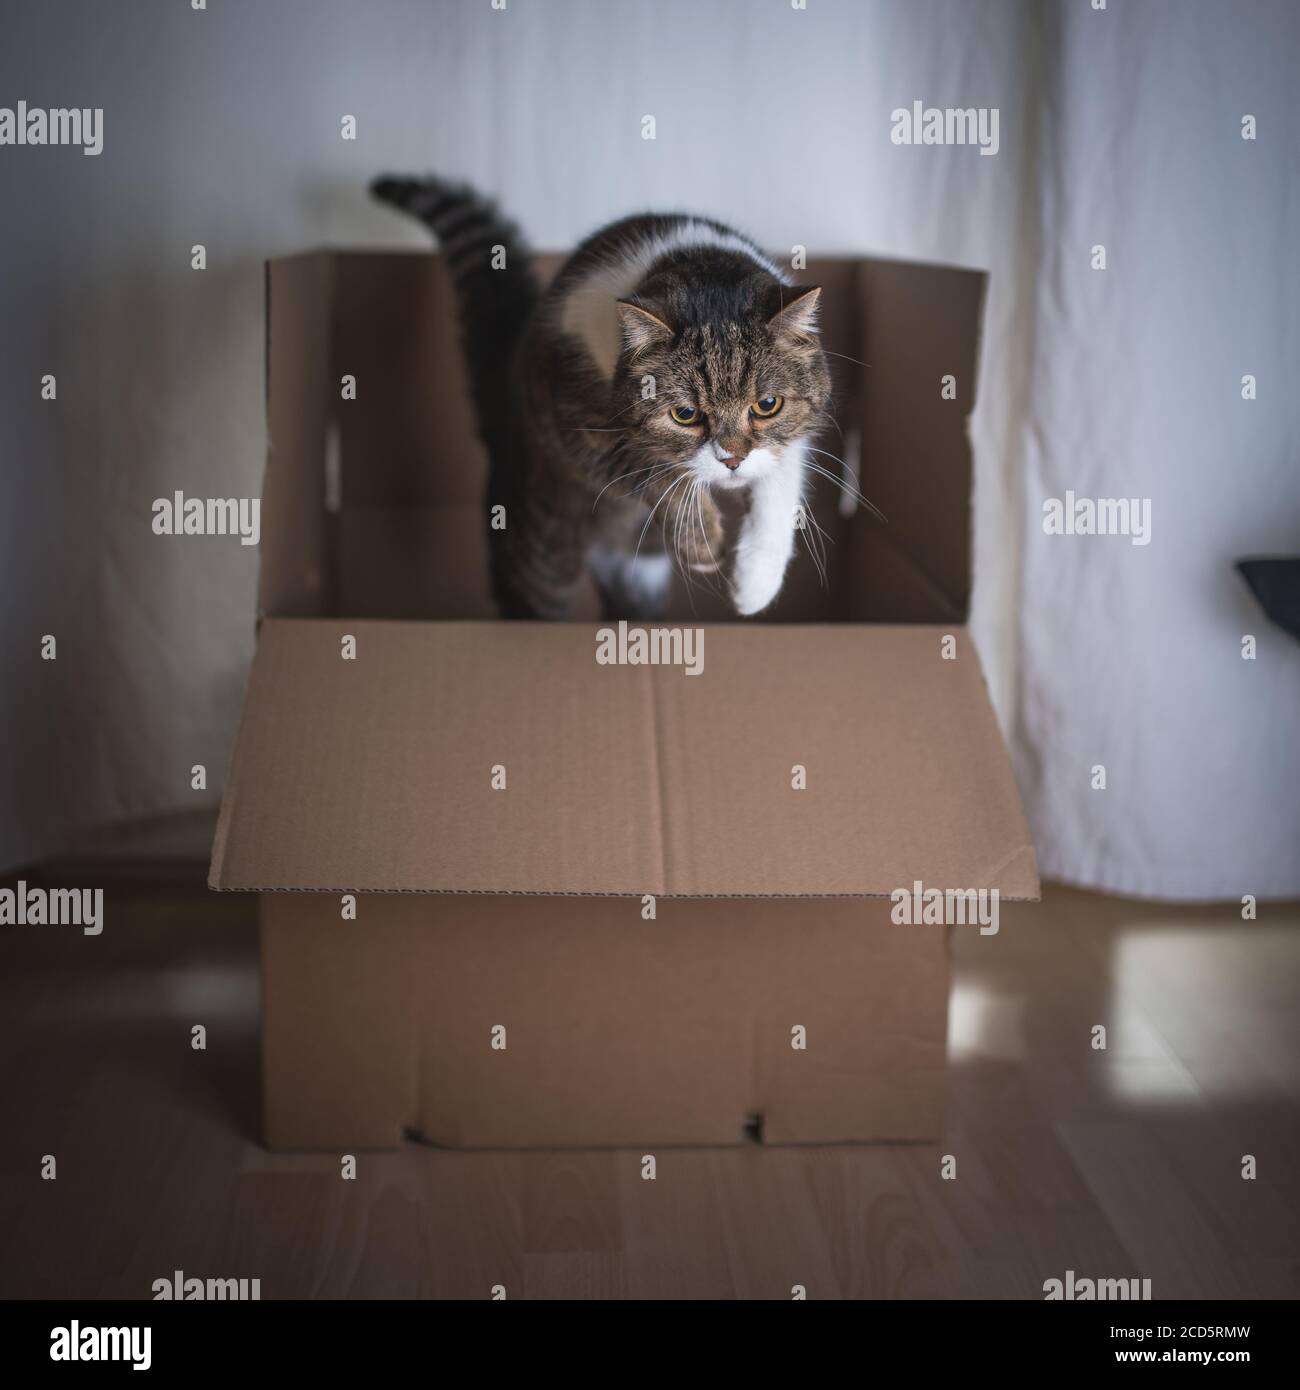 tabby british shorthair cat jumping out of a cardboard box Stock Photo